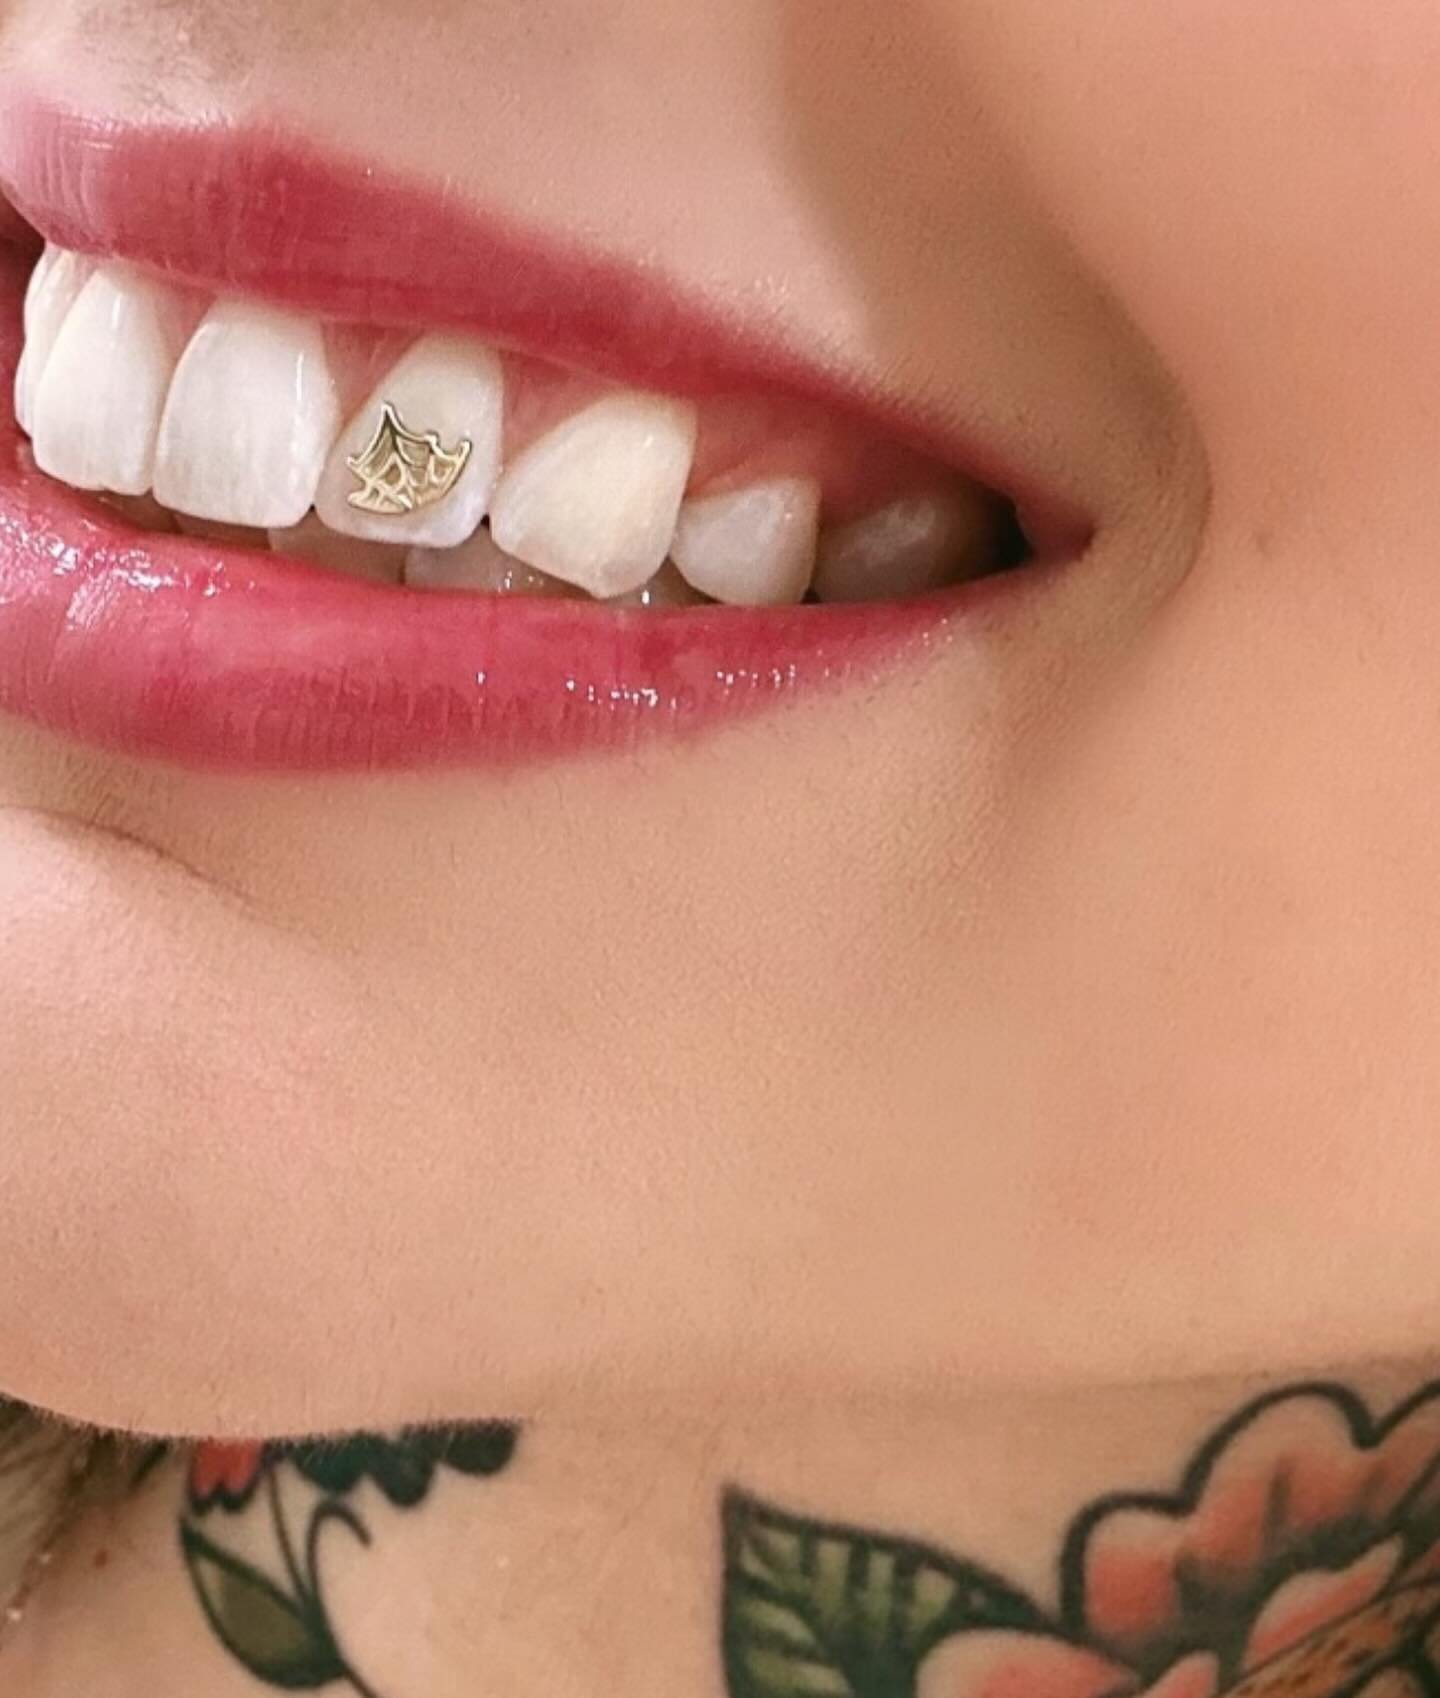 We offer tooth gems at both locations 💎

Whether it&rsquo;s a crystal or a gold design we have it all 💎

For custom gems email 📧 

Pair with a tooth whitening for the perfect smile 🦷